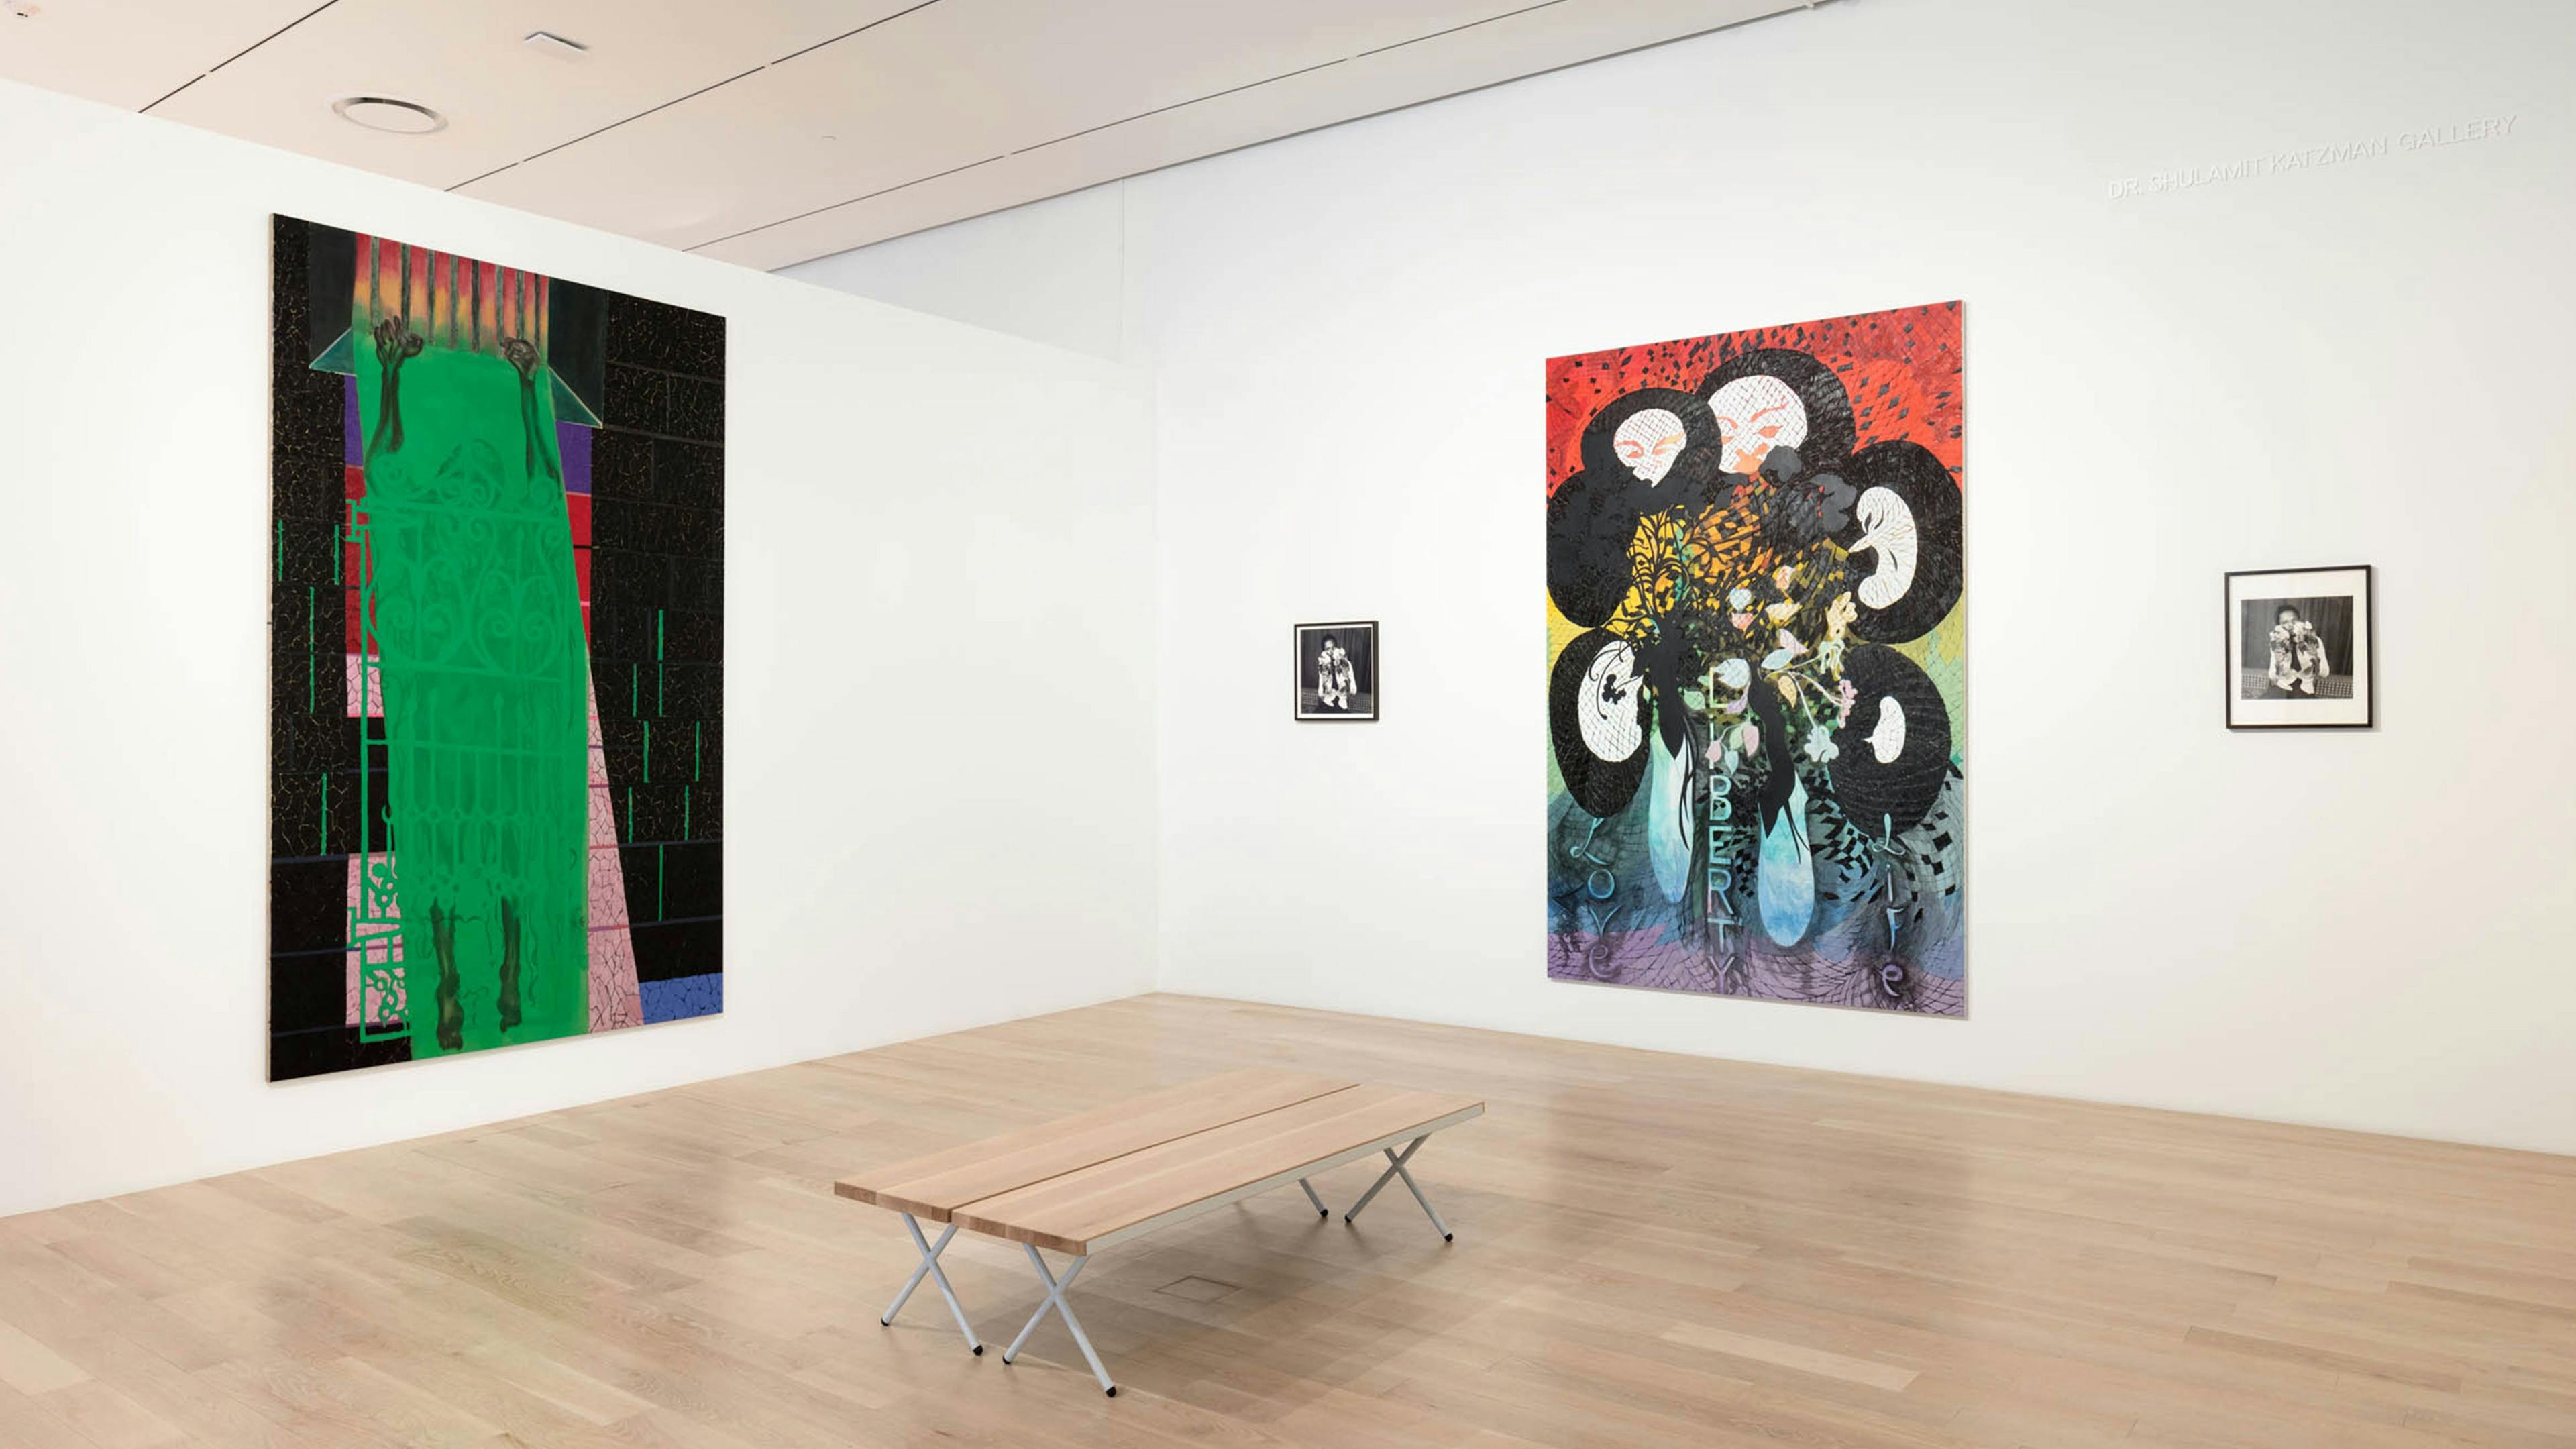 Installation view of Chris Ofili’s work at Institute of Contemporary Art, Miami